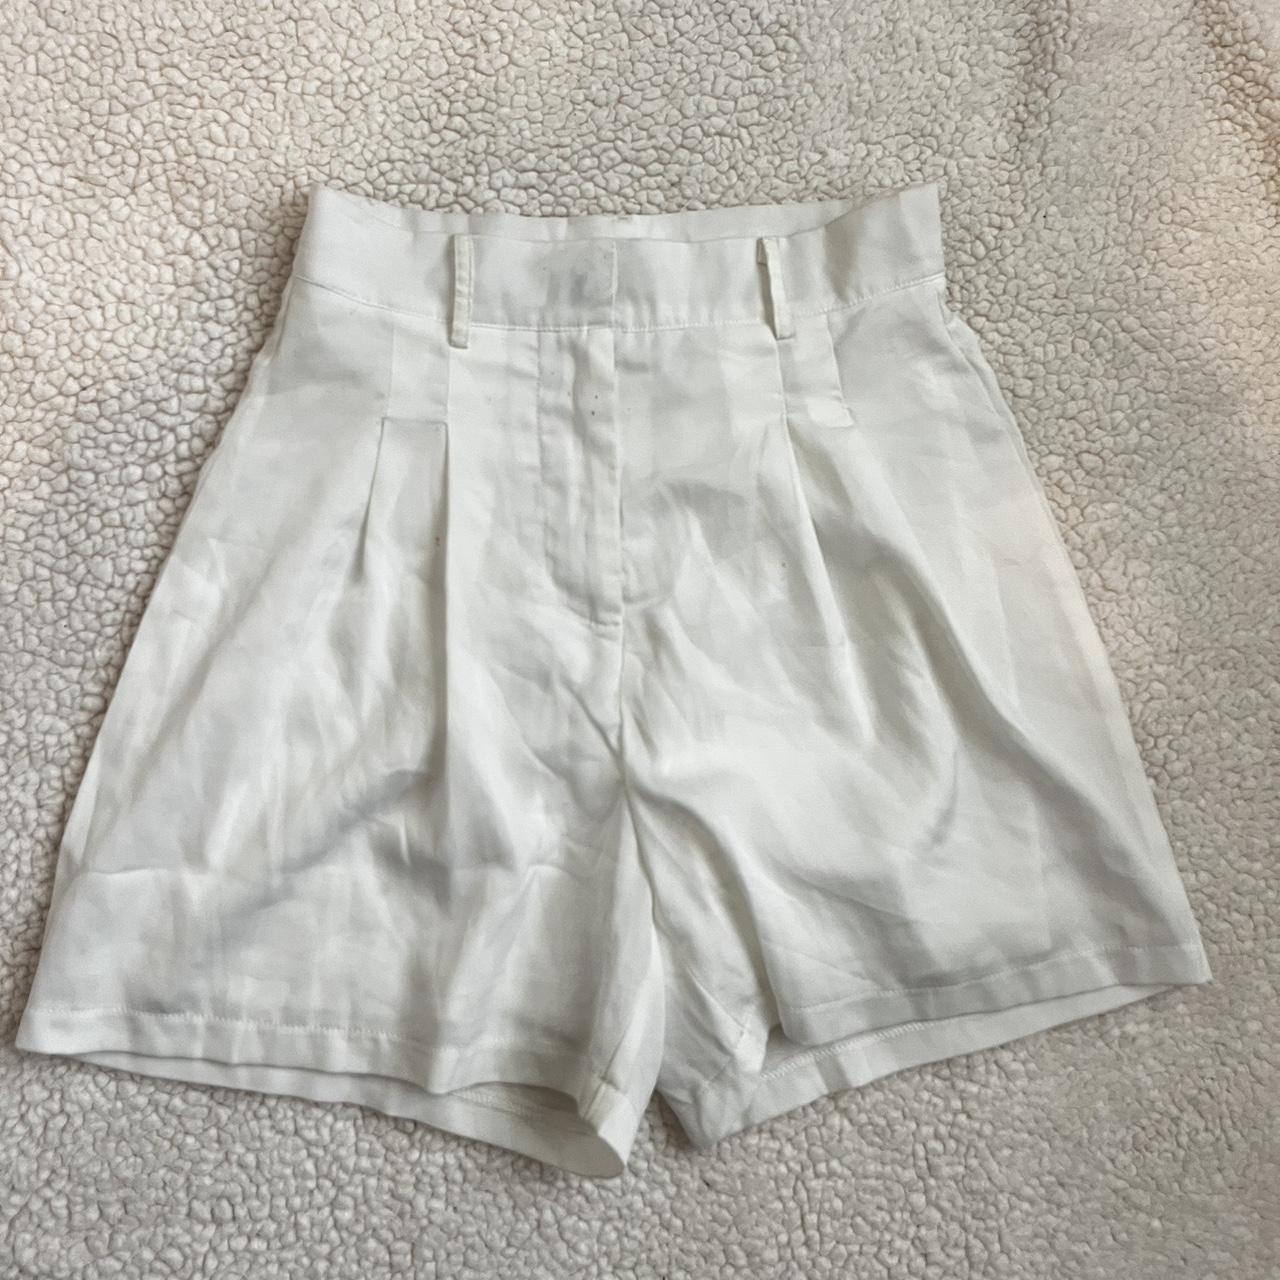 princess polly linen white shorts. small stains on... - Depop